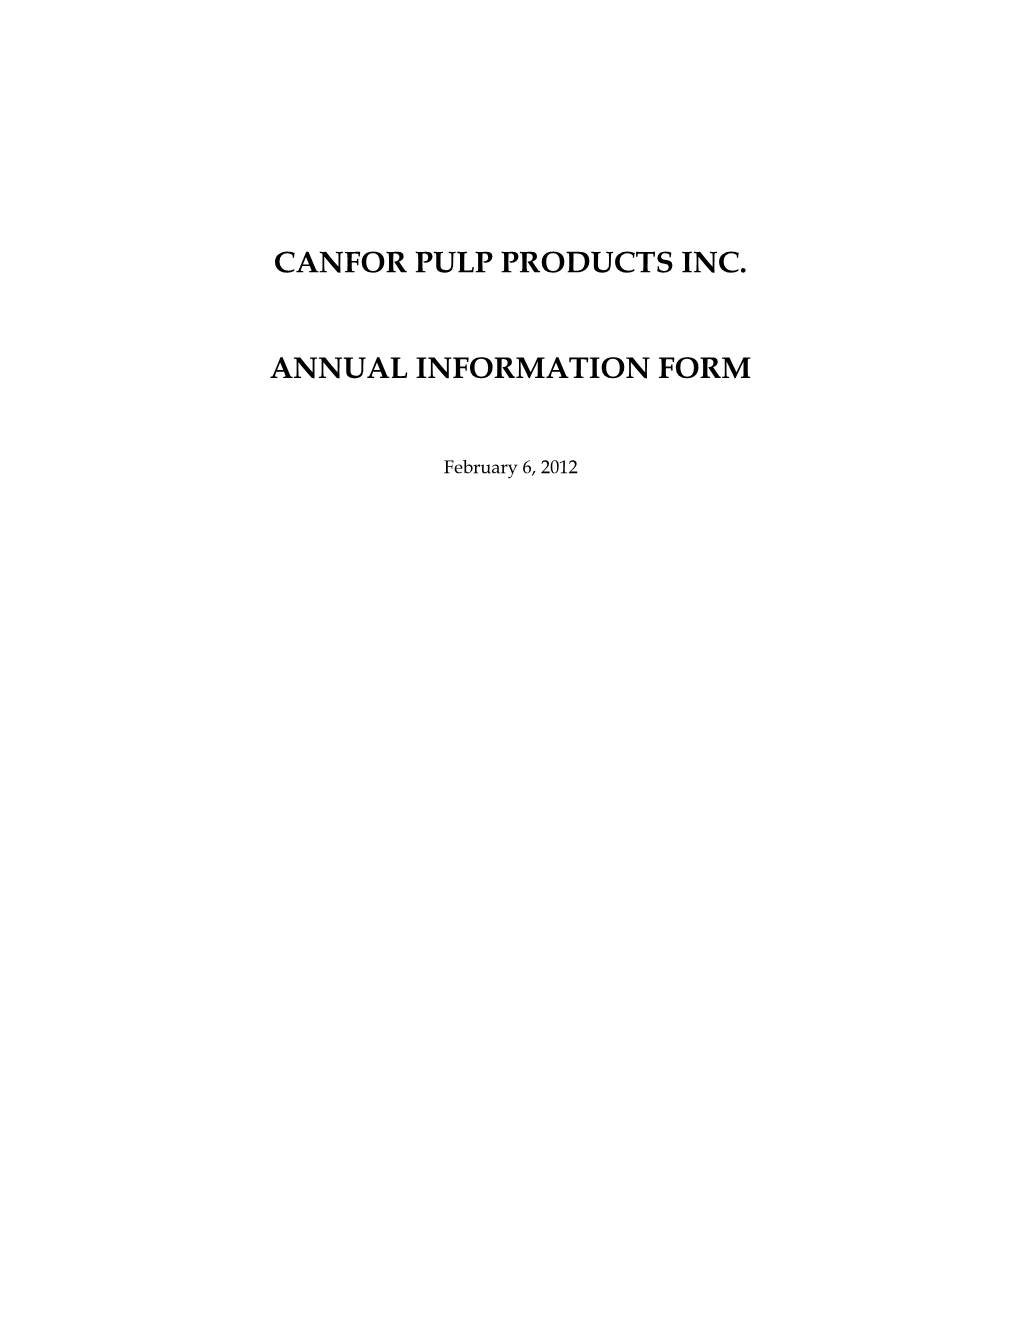 Canfor Pulp Products Inc. Annual Information Form